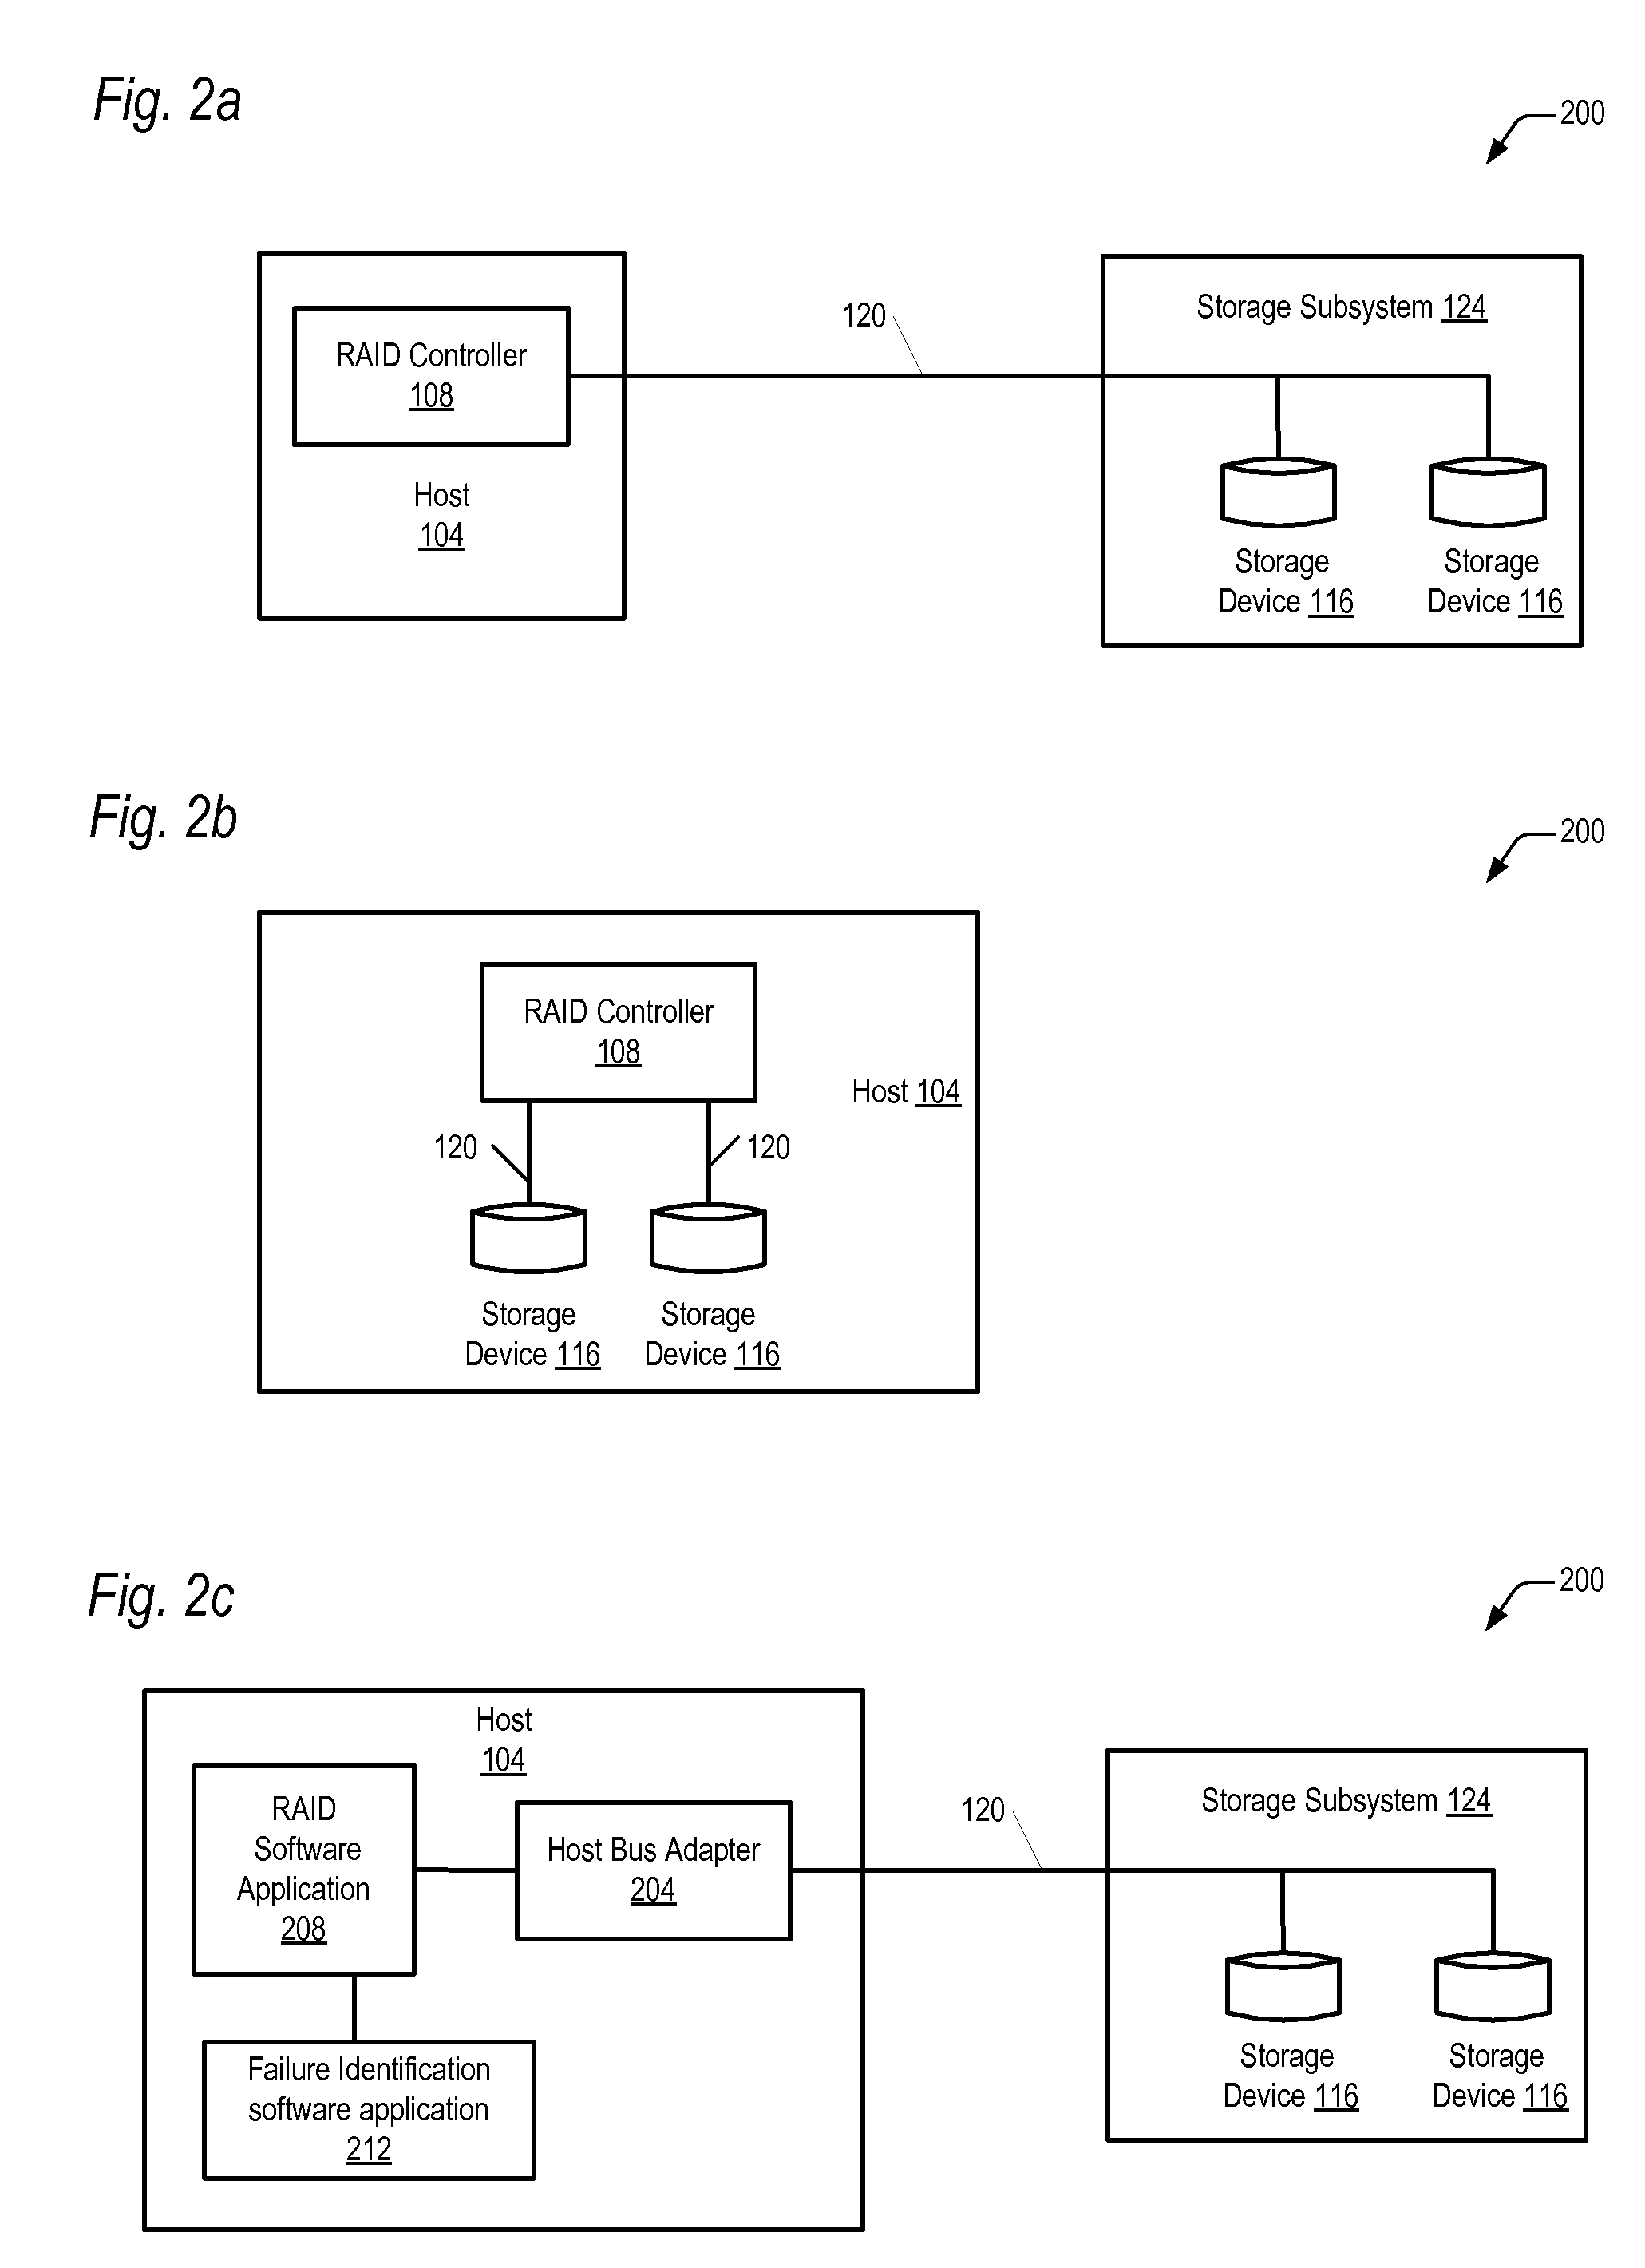 Apparatus and method for identifying disk drives with unreported data corruption